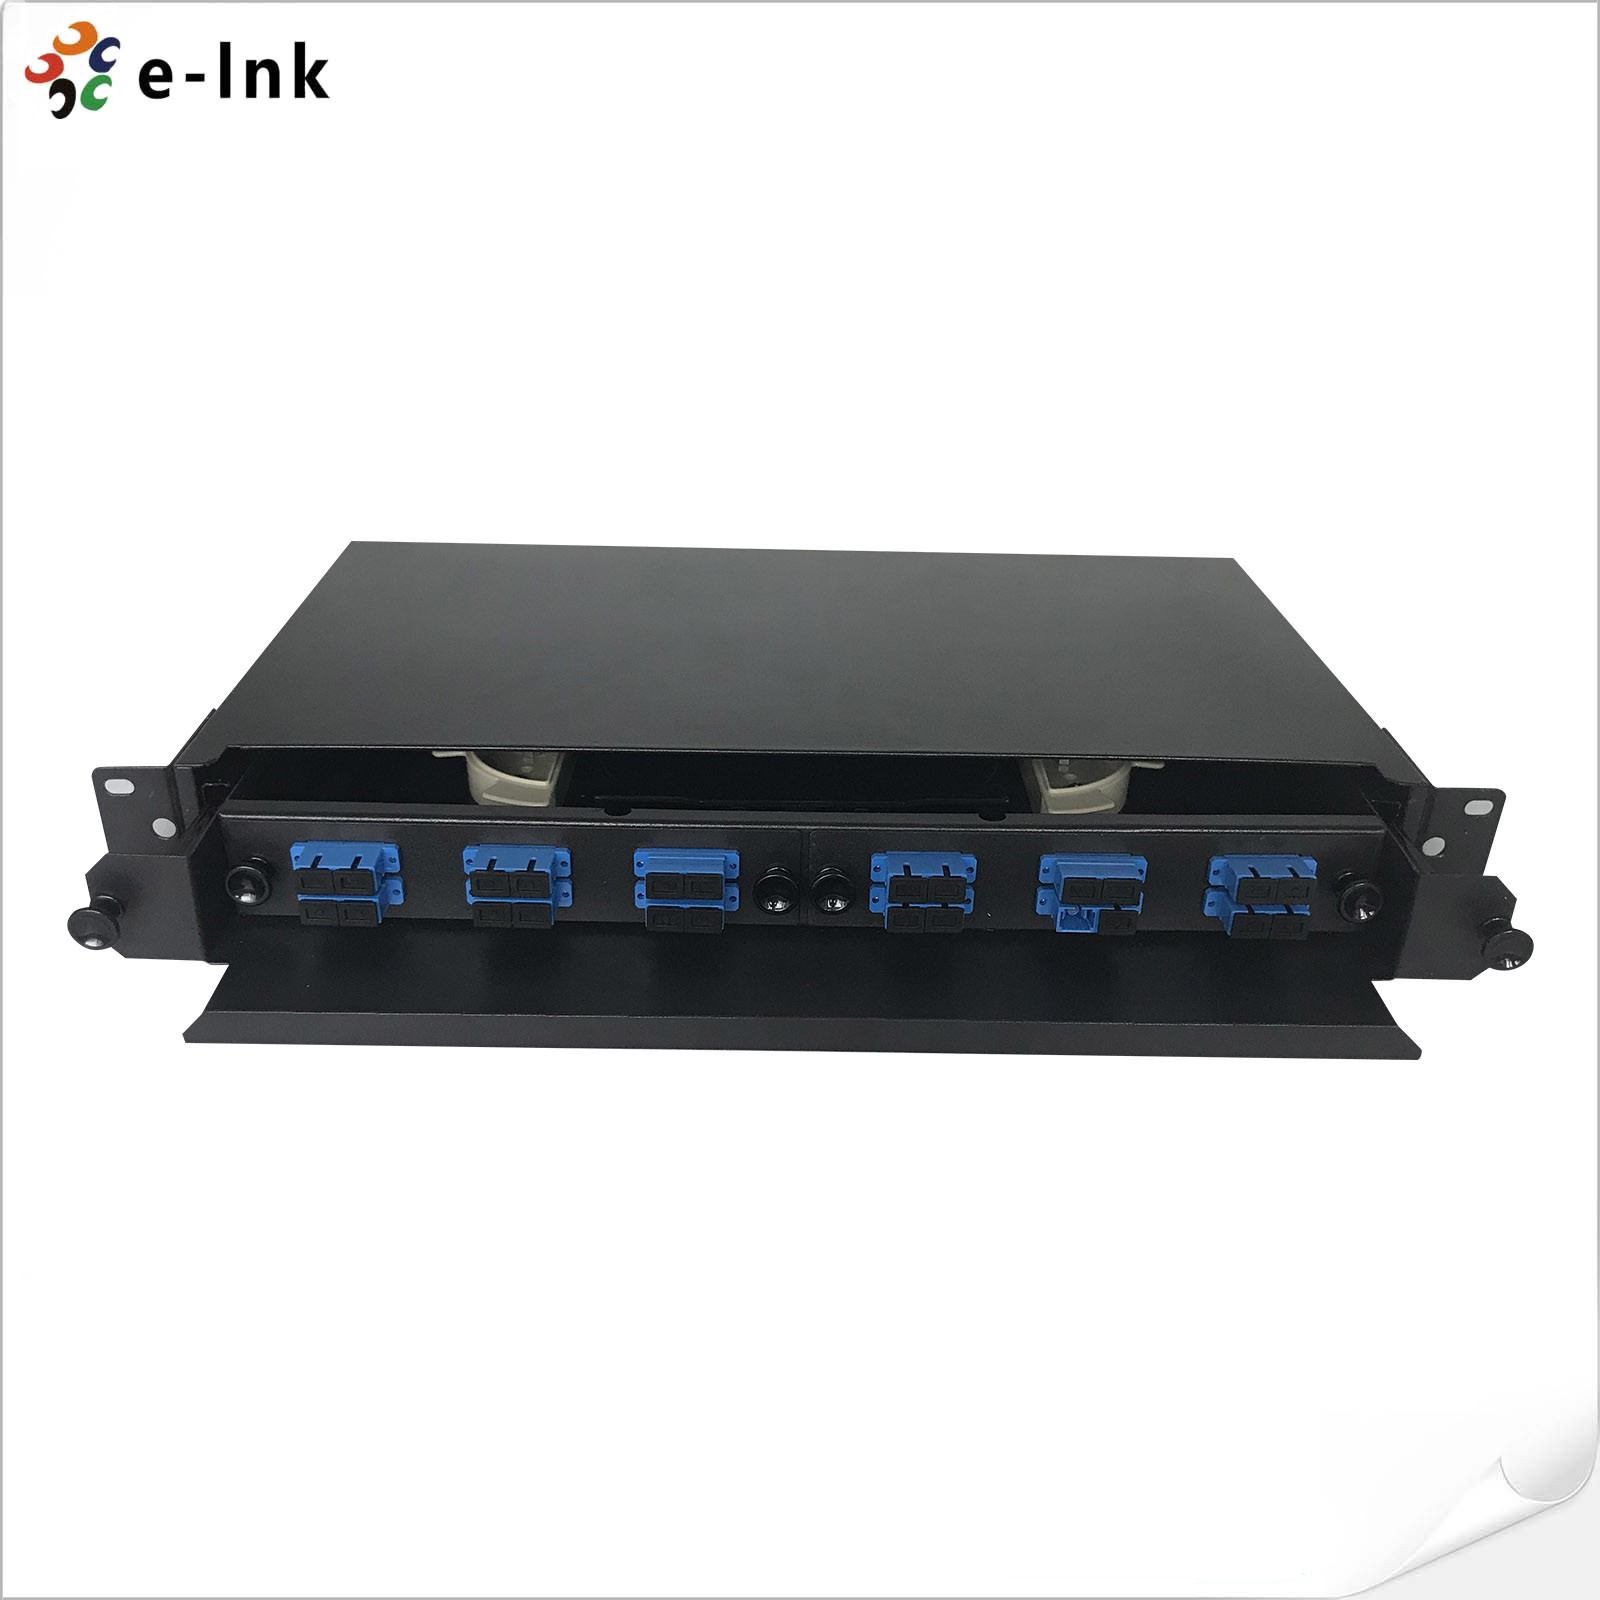 China 19 Inch FPP Rack Mount Fiber Patch Panel Drawer Type 12-144 Ports With SC Adapter wholesale